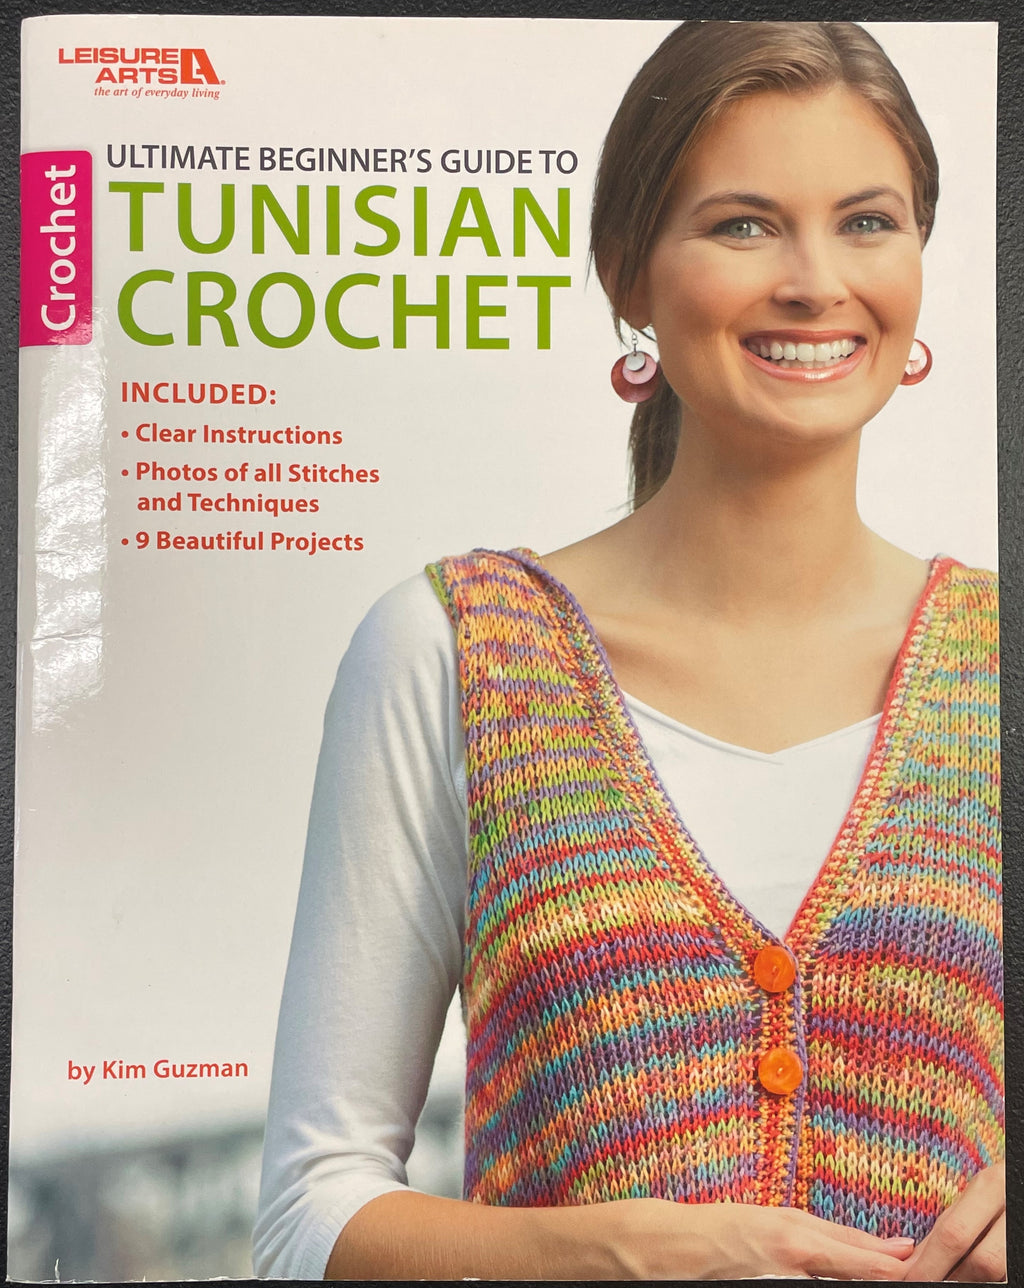 Ultimate Beginners Guide to Tunisian Crochet – Low Country Shrimp and Knits